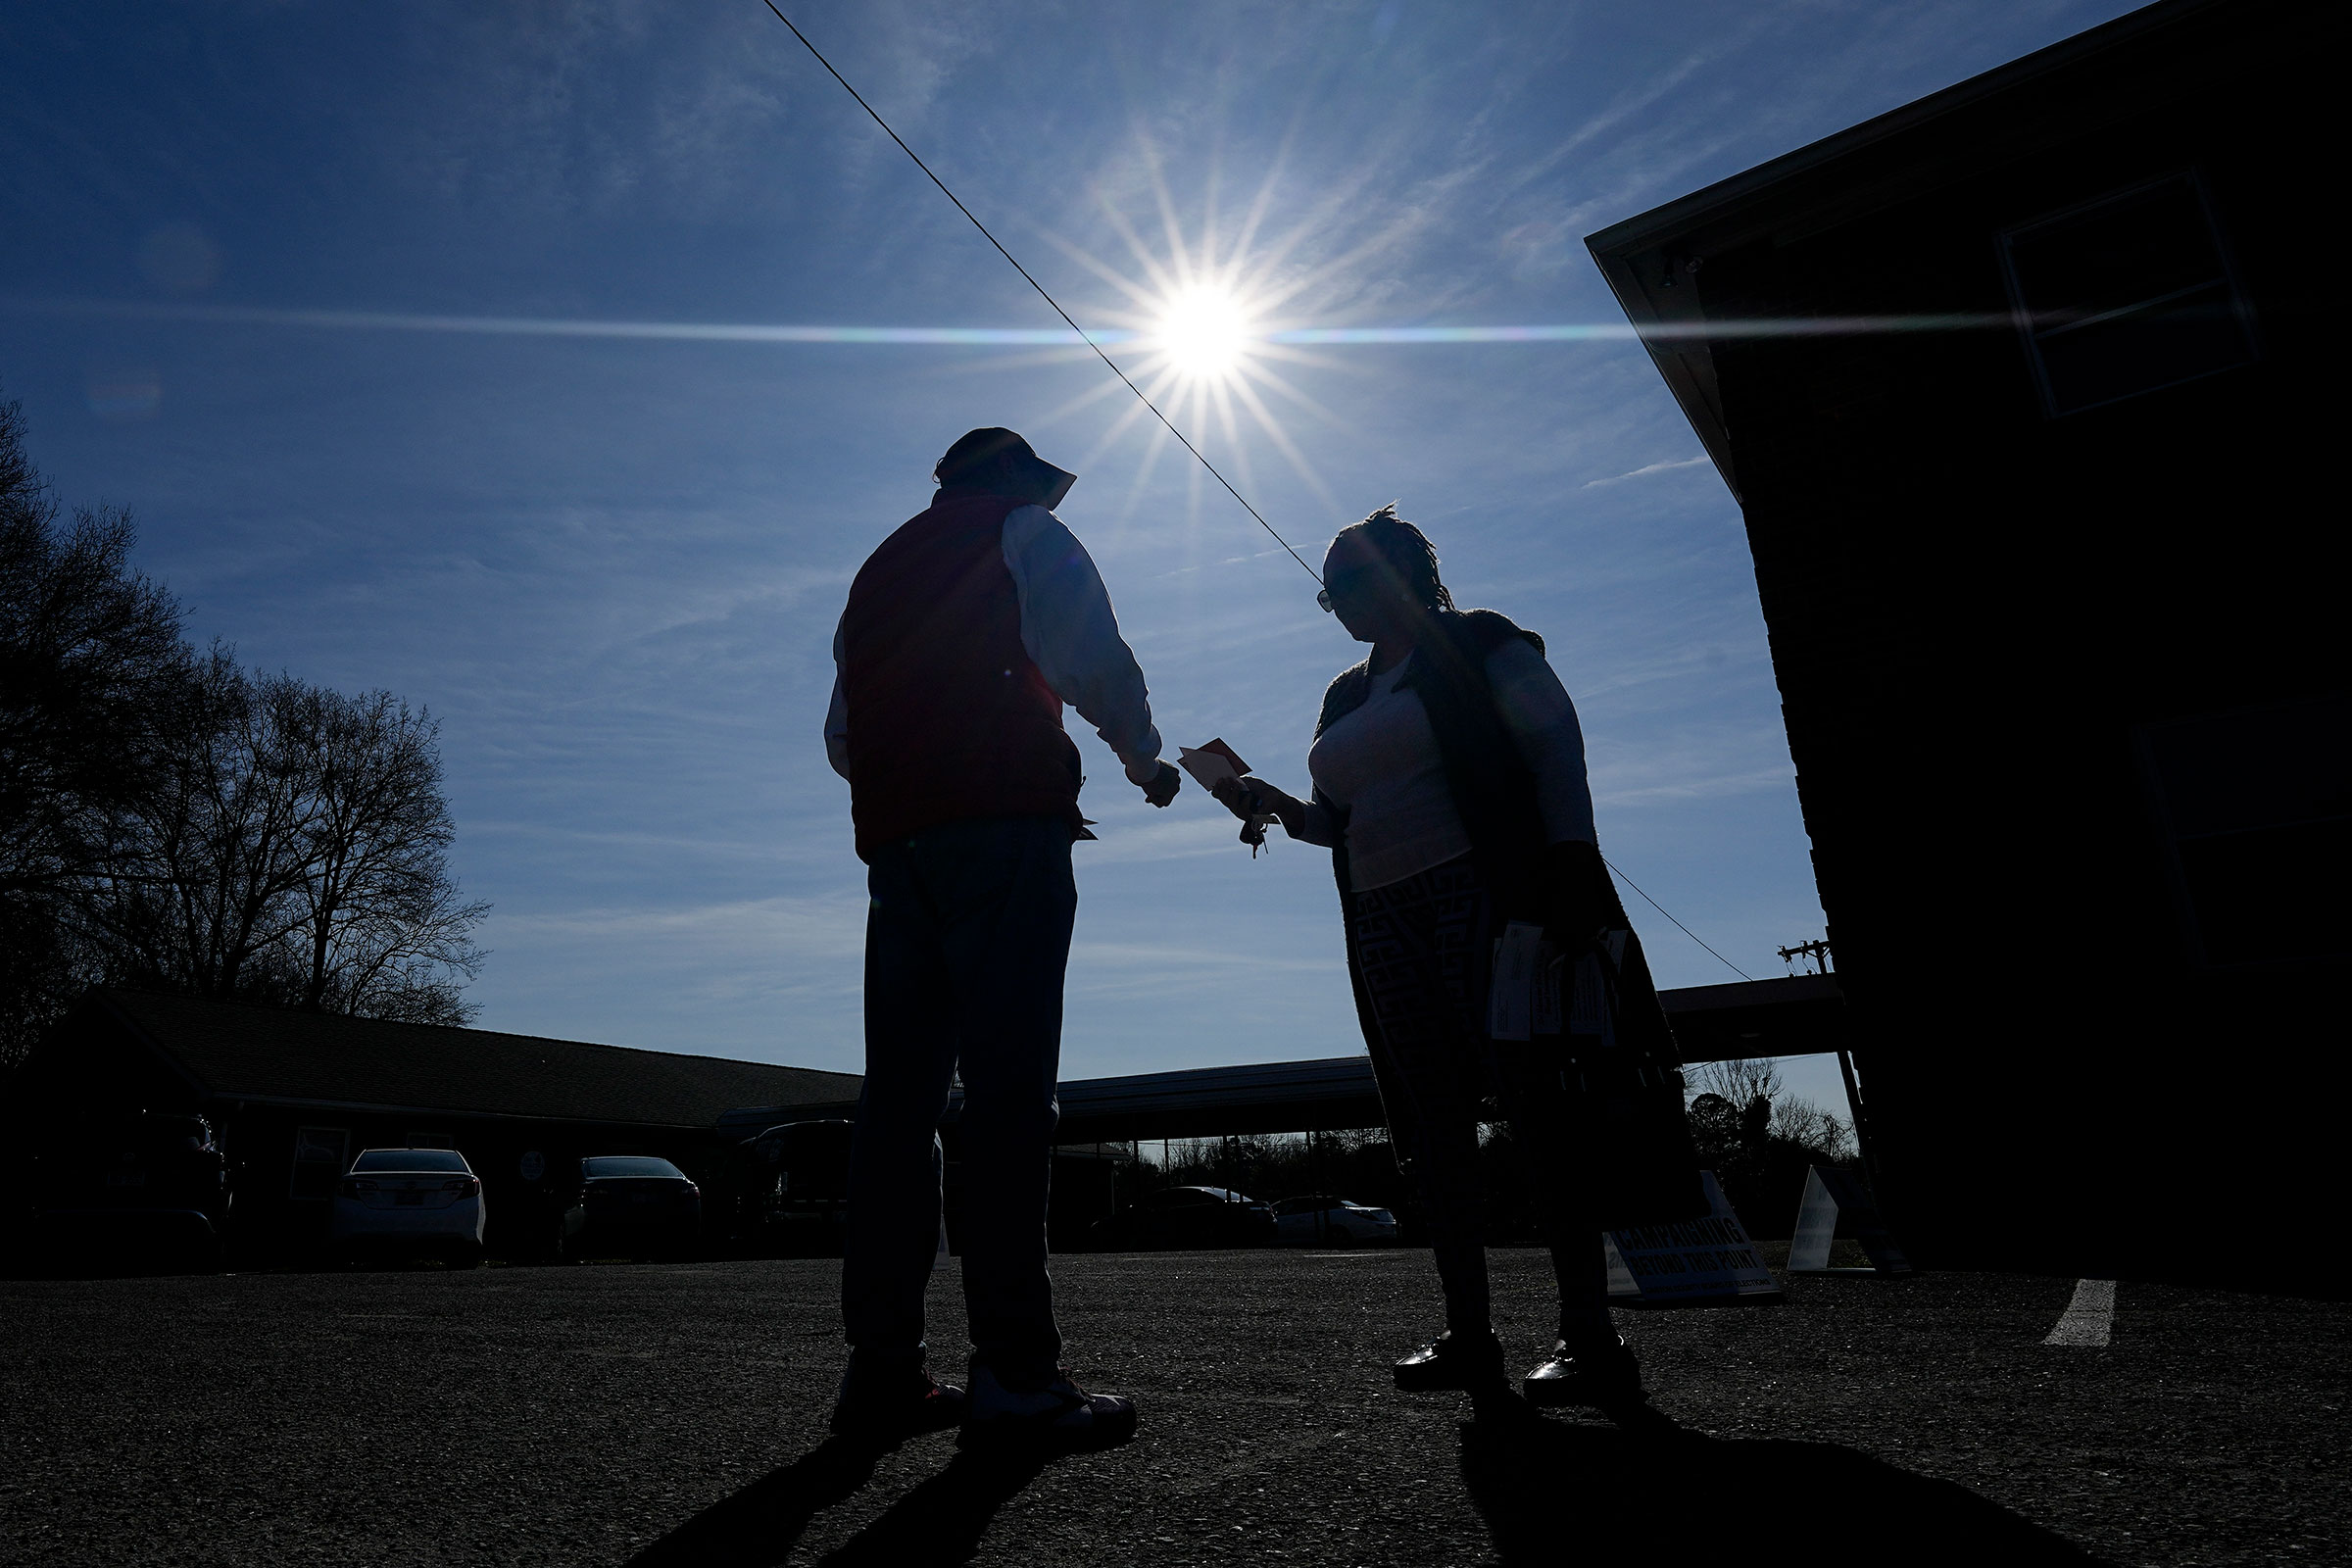 Ron Worley, candidate for Gaston county commissioner, left, talks with a voter on Super Tuesday at the entrance to a polling location on Tuesday, March 5, in Belmont, North Carolina.